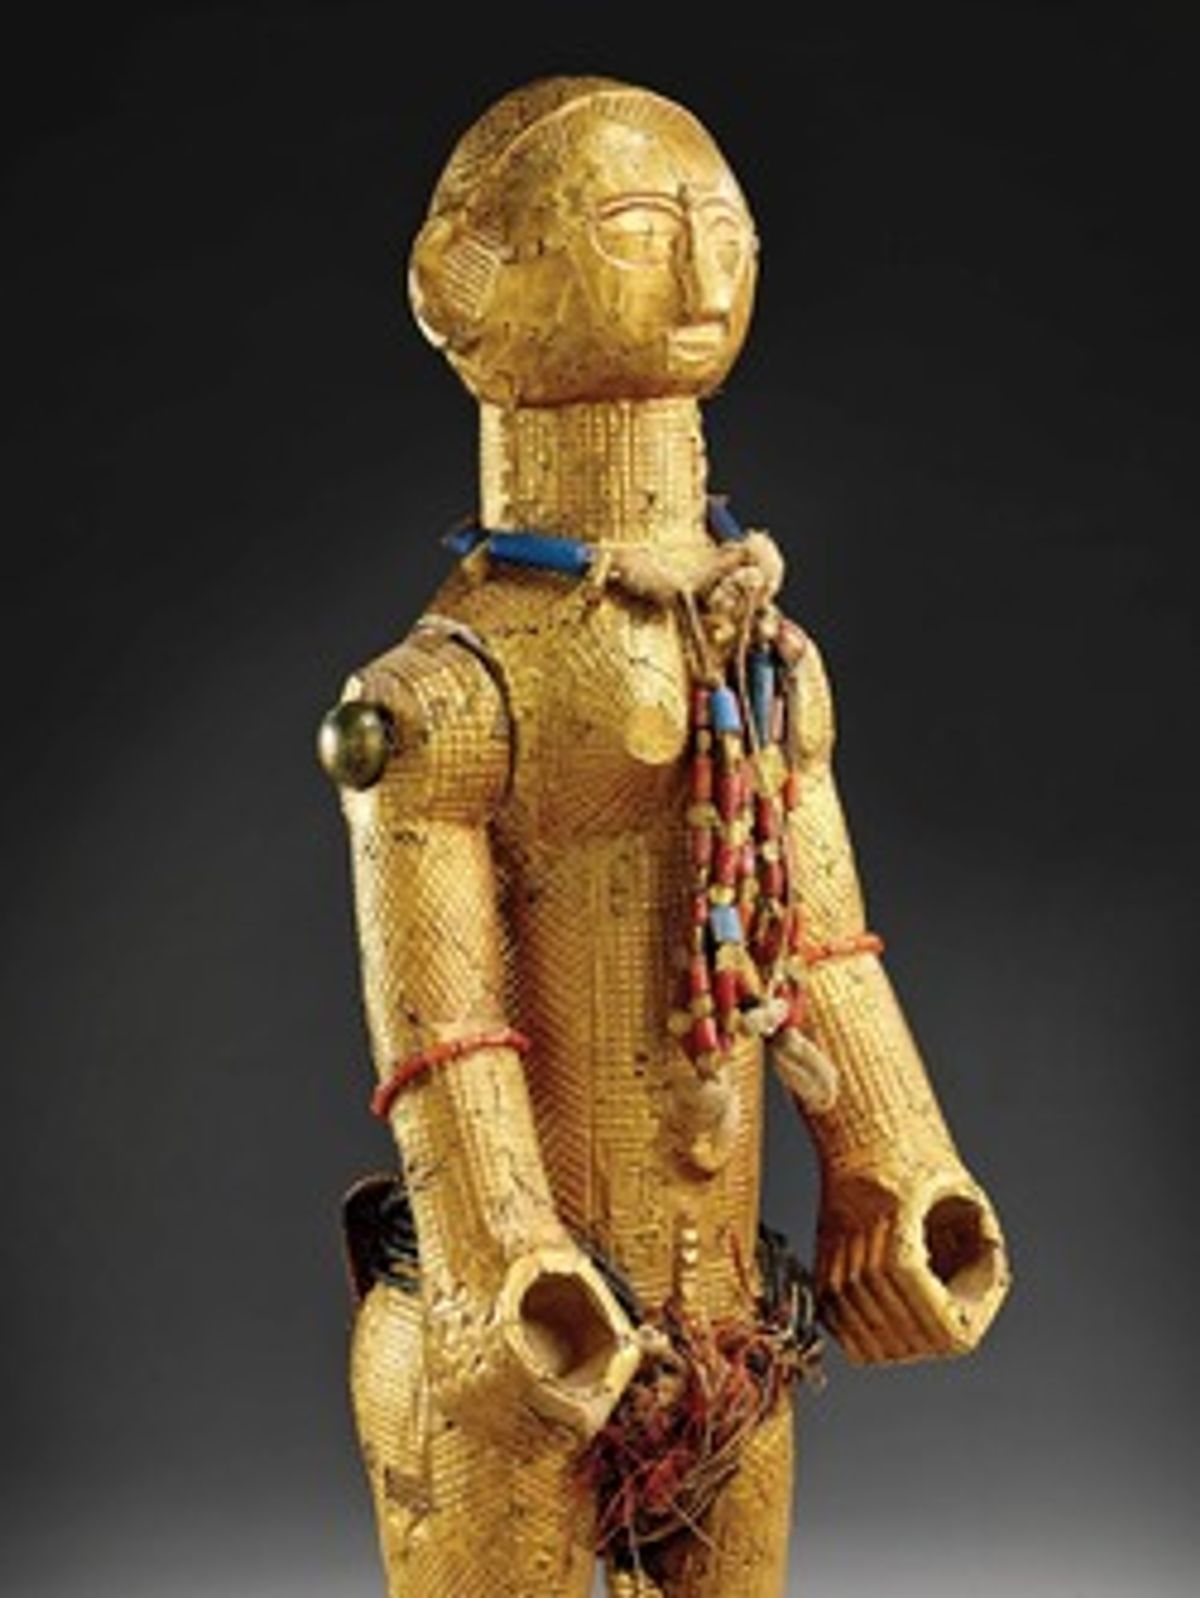 This 19th-century female figure from the current-day Ivory Coast is made of wood, gold, brass, coral, glass, coconut, vegetable fibres and cotton (© Musée du quai Branly - Jacques Chirac, photo Claude Germain)